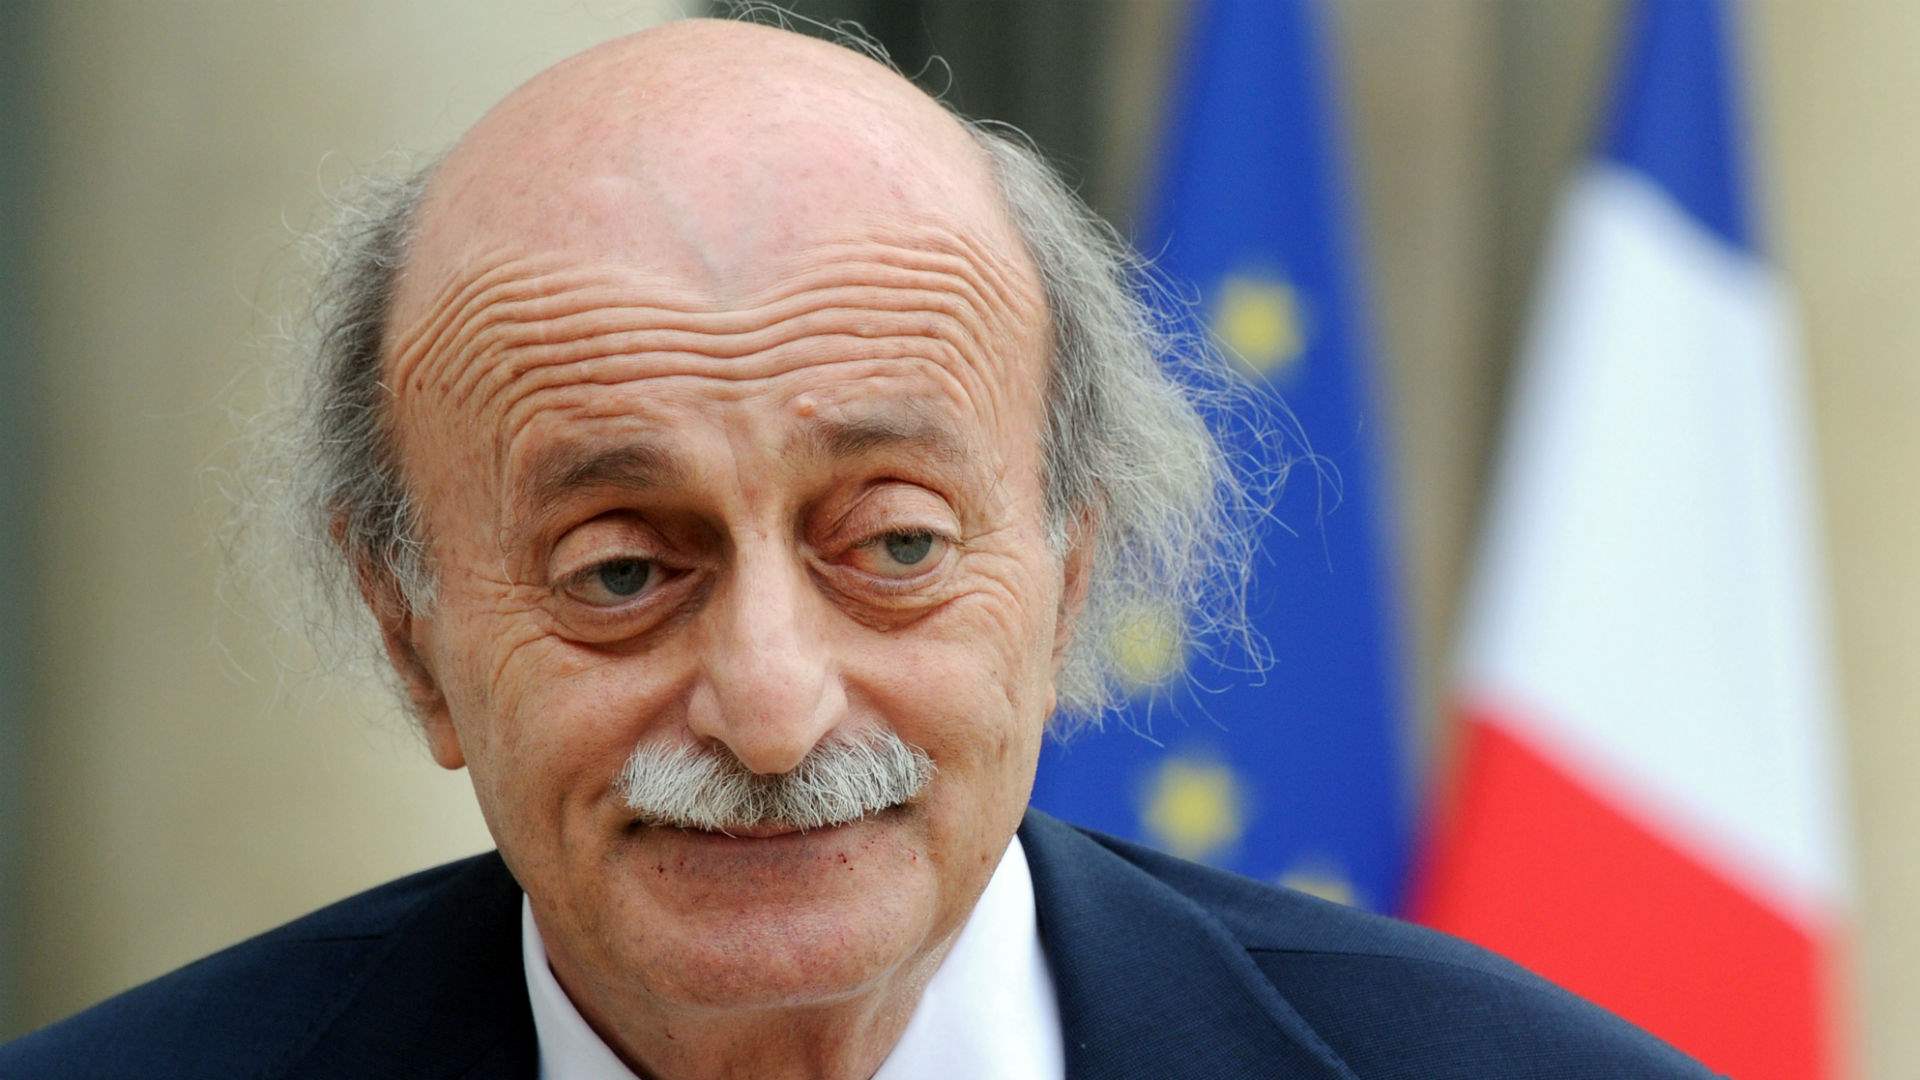 Jumblatt waits for Christians and Riyadh to take final stance on presidential elections